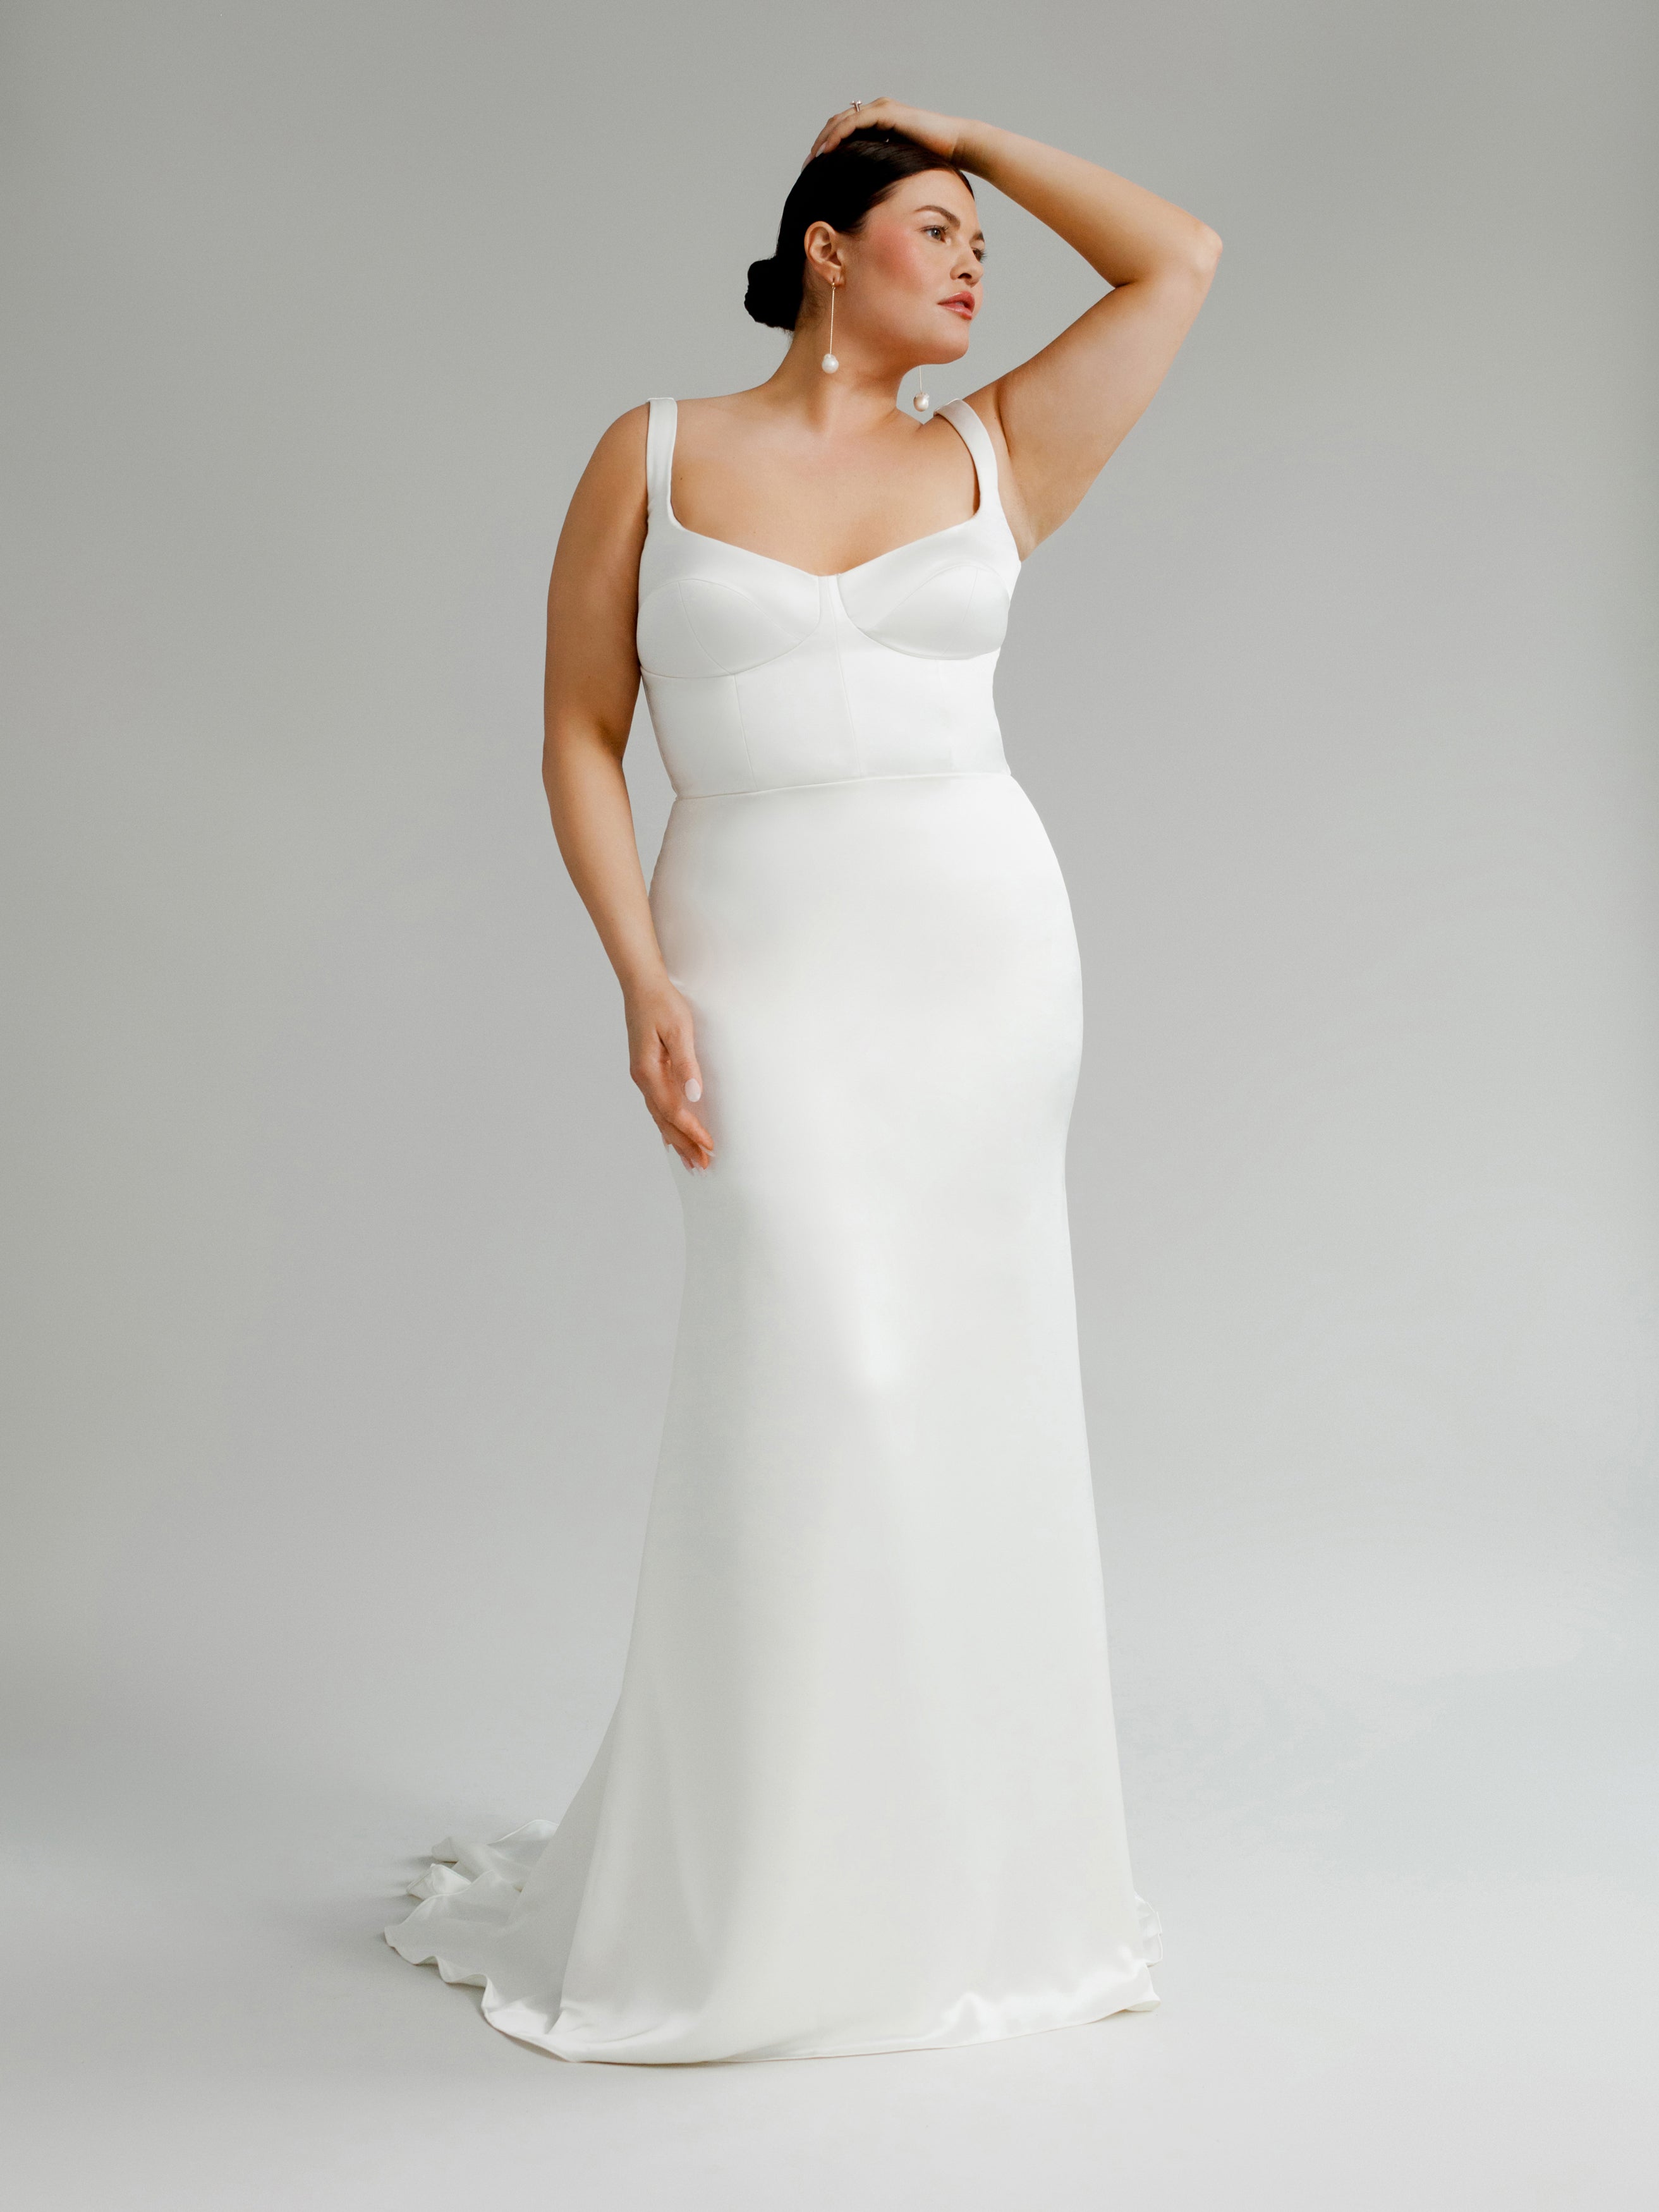 Angelica : A wedding gown with a bustier-style bodice + low back – Aesling